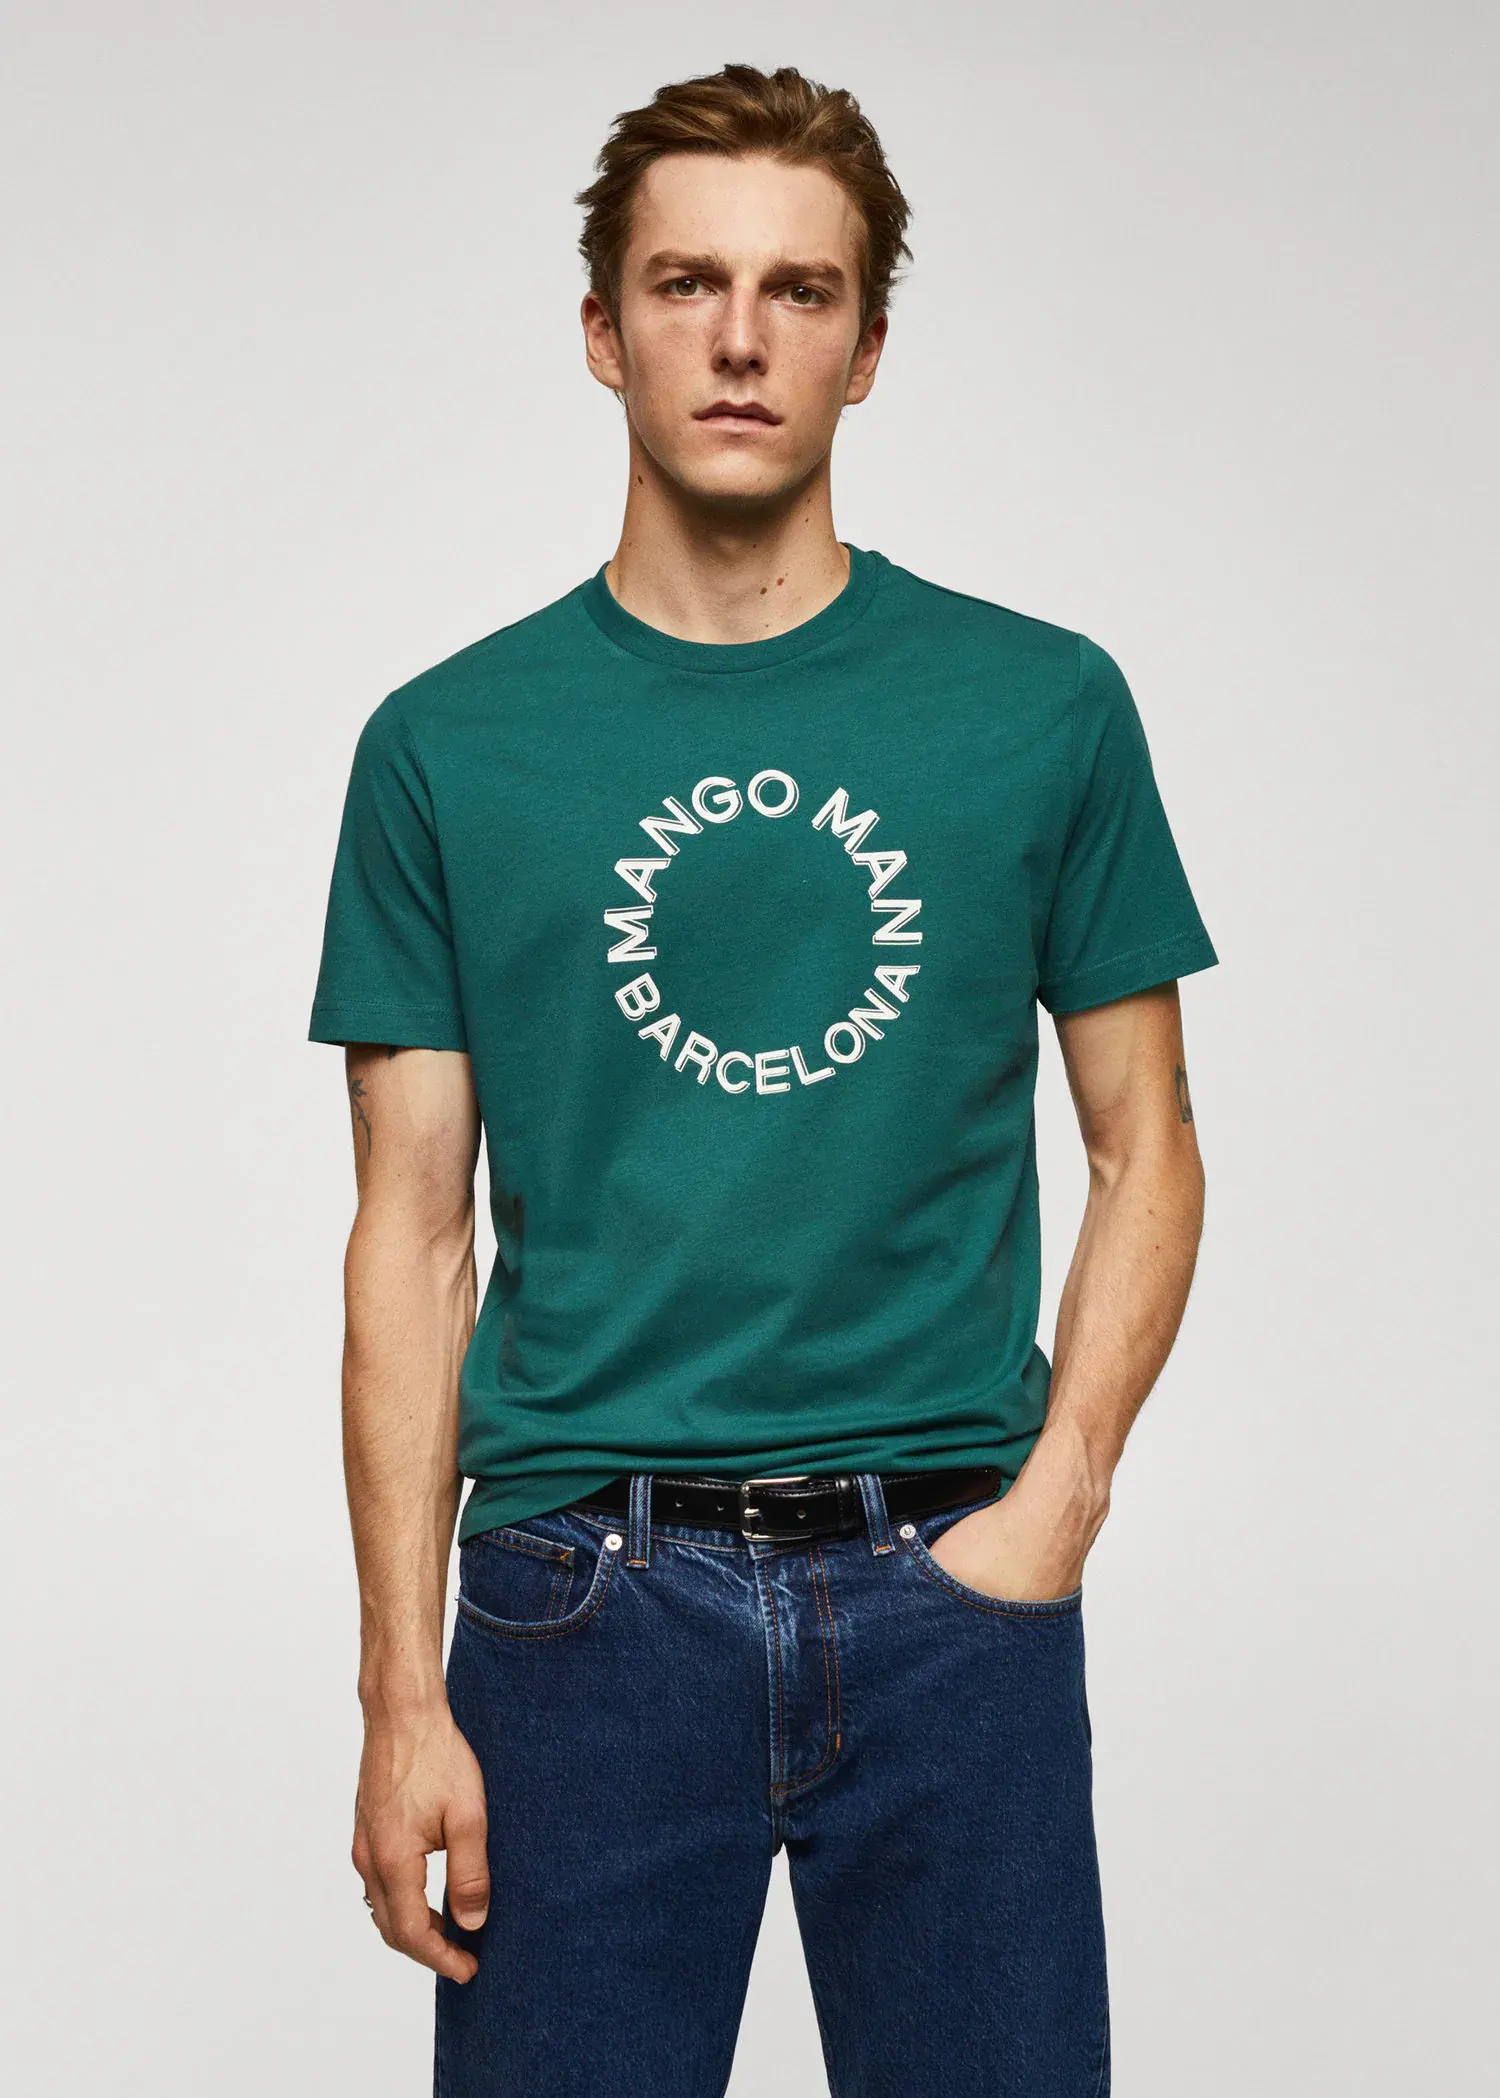 Mango 100% cotton t-shirt with logo. a man wearing a green t-shirt and blue jeans. 